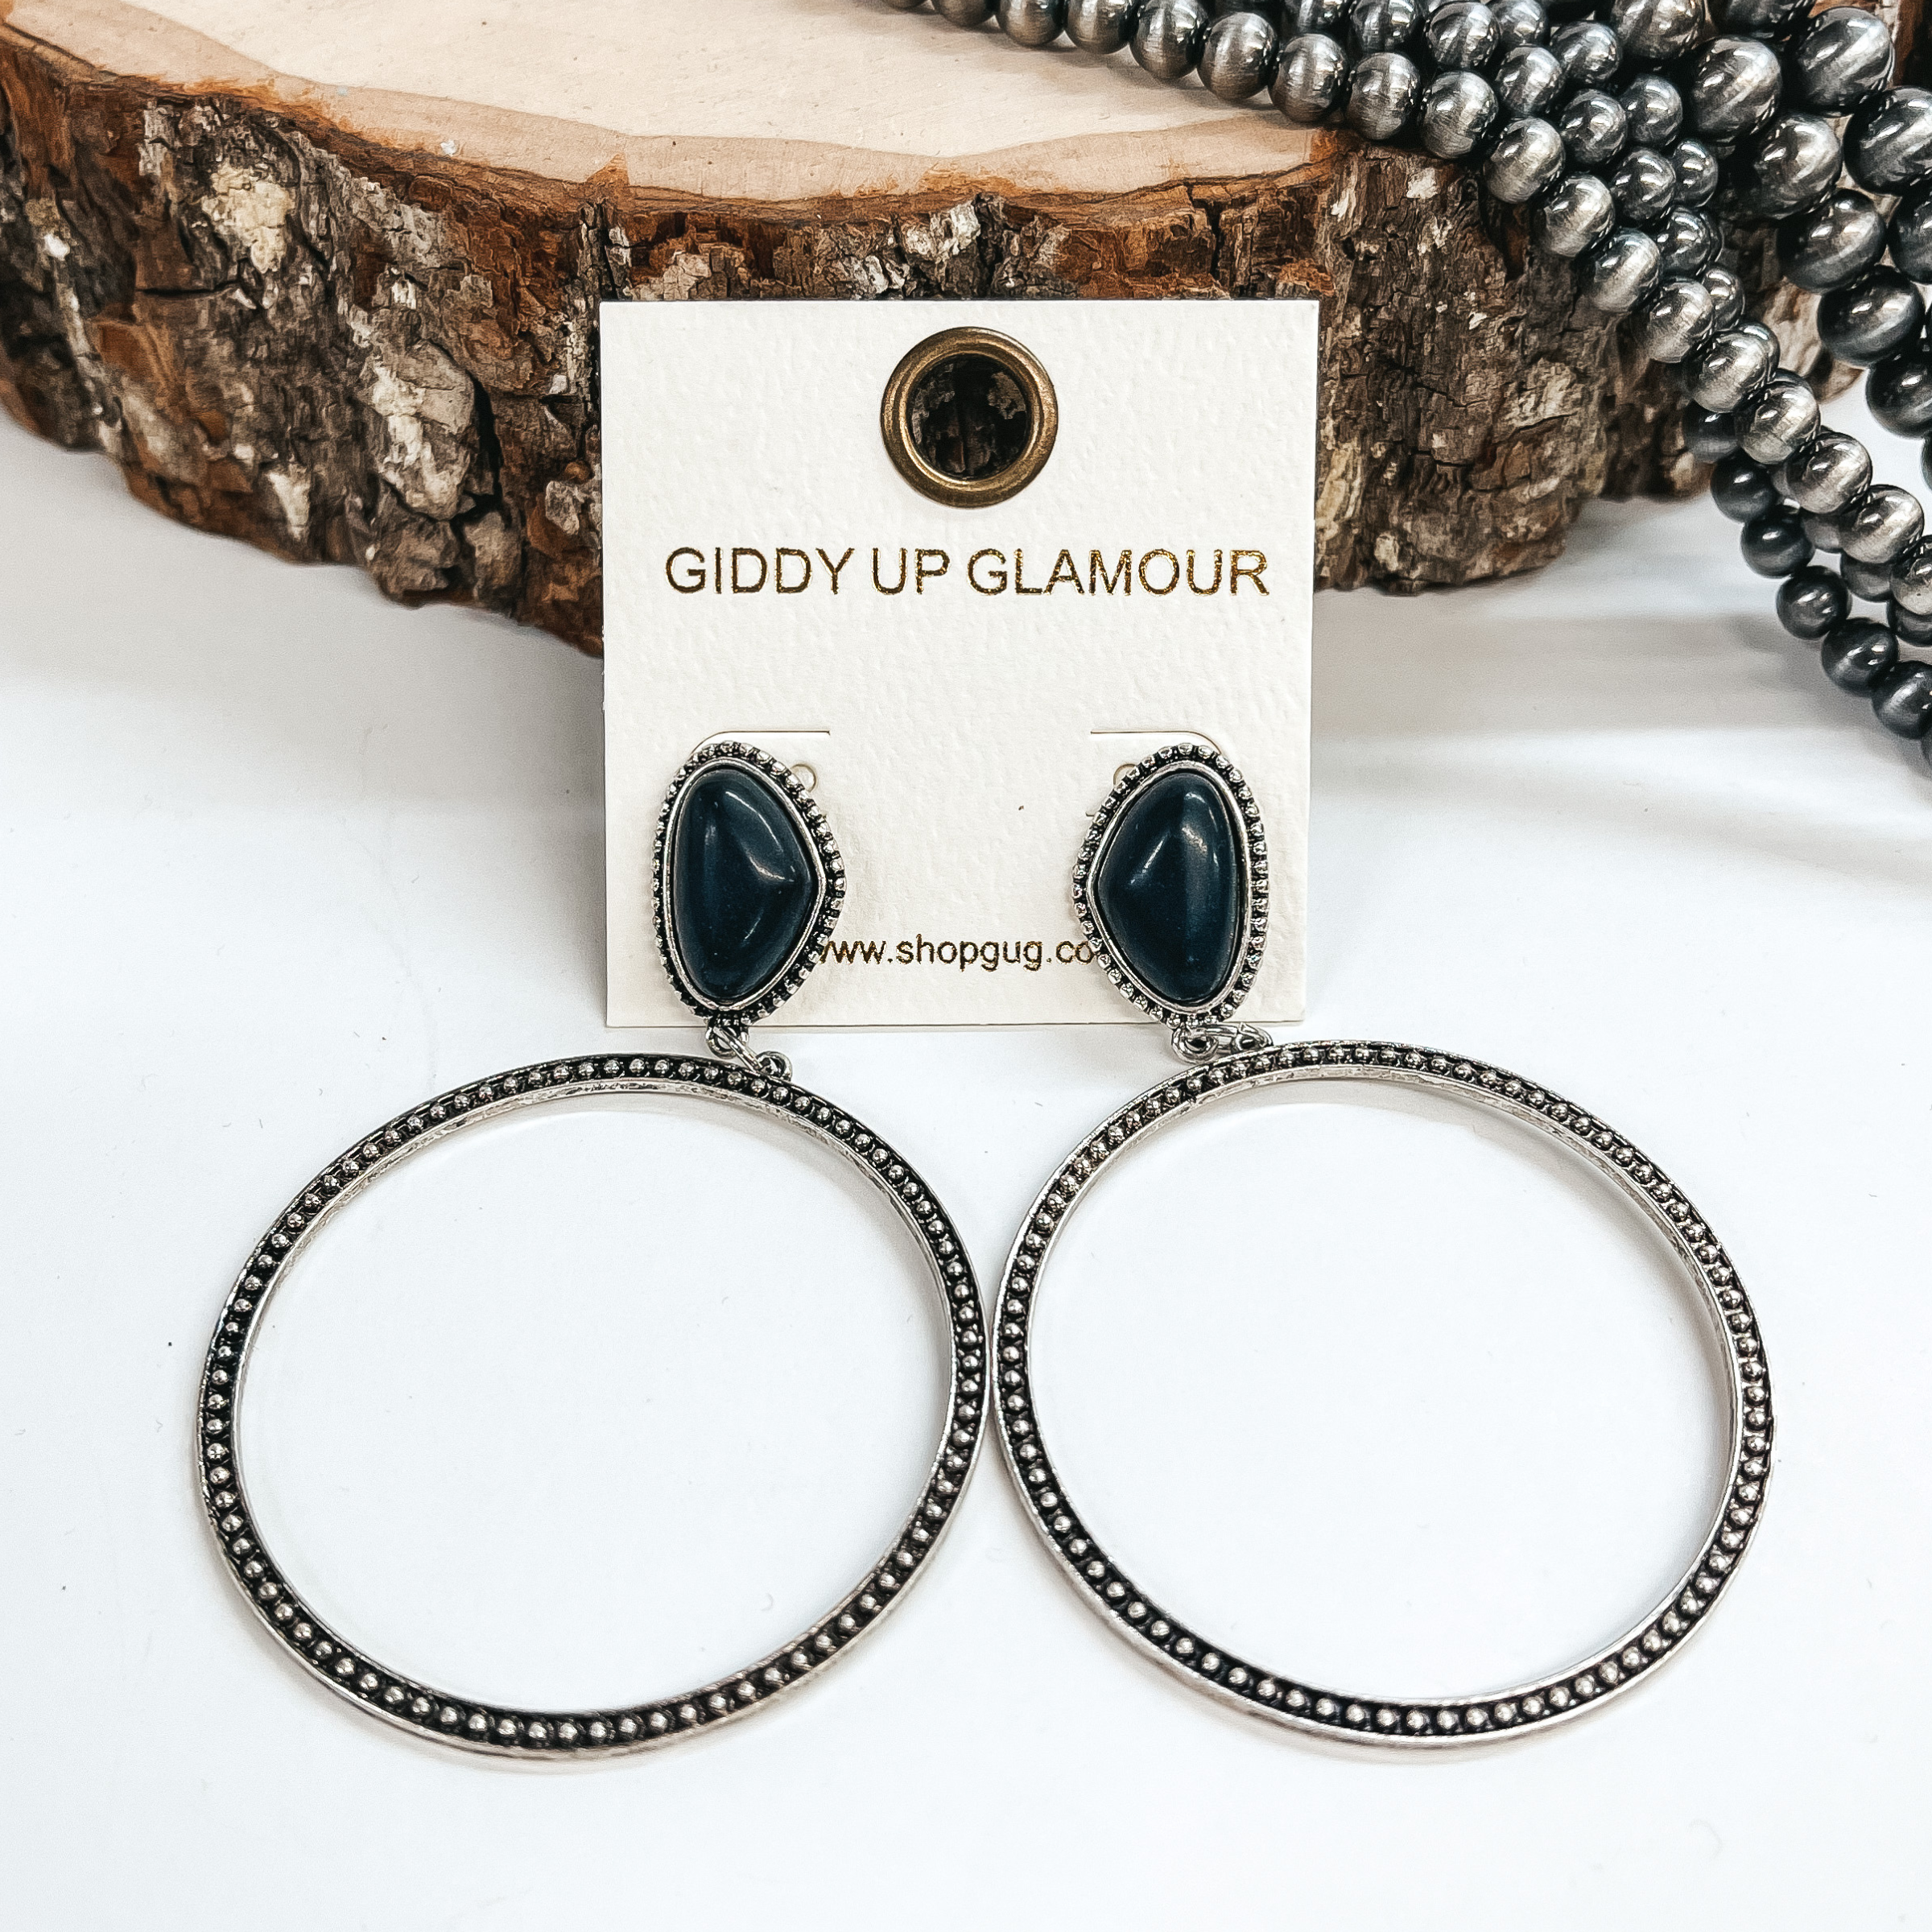 Asymmetrical stone stud earrings in black with a  silver, textured open circle pendant hanging from  the bottom. These earrings are  pictured on a white background, leaning up against a  slab of wood and withe faux navajo pearls in the back  as decor.